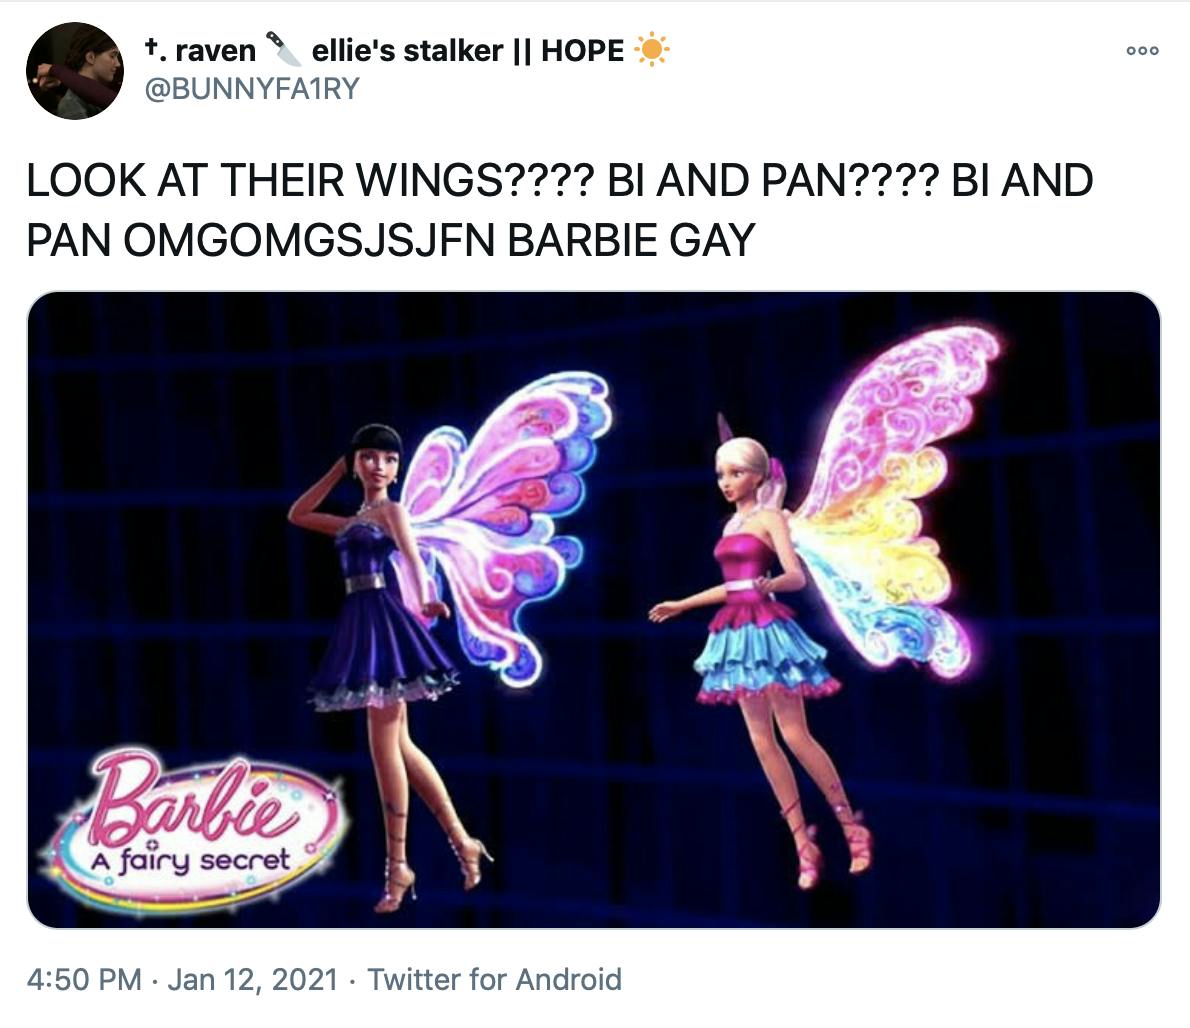 'LOOK AT THEIR WINGS???? BI AND PAN???? BI AND PAN OMGOMGSJSJFN BARBIE GAY' promotional image from Barbie, a fairy secret. The cgi doll on the left has dark hair, a knee length dress with a puffy skirt and blue, pink and purple wings. The doll on the right has a blonde ponytail, a pink and blue frilly dress and pink, yellow and blue wings.